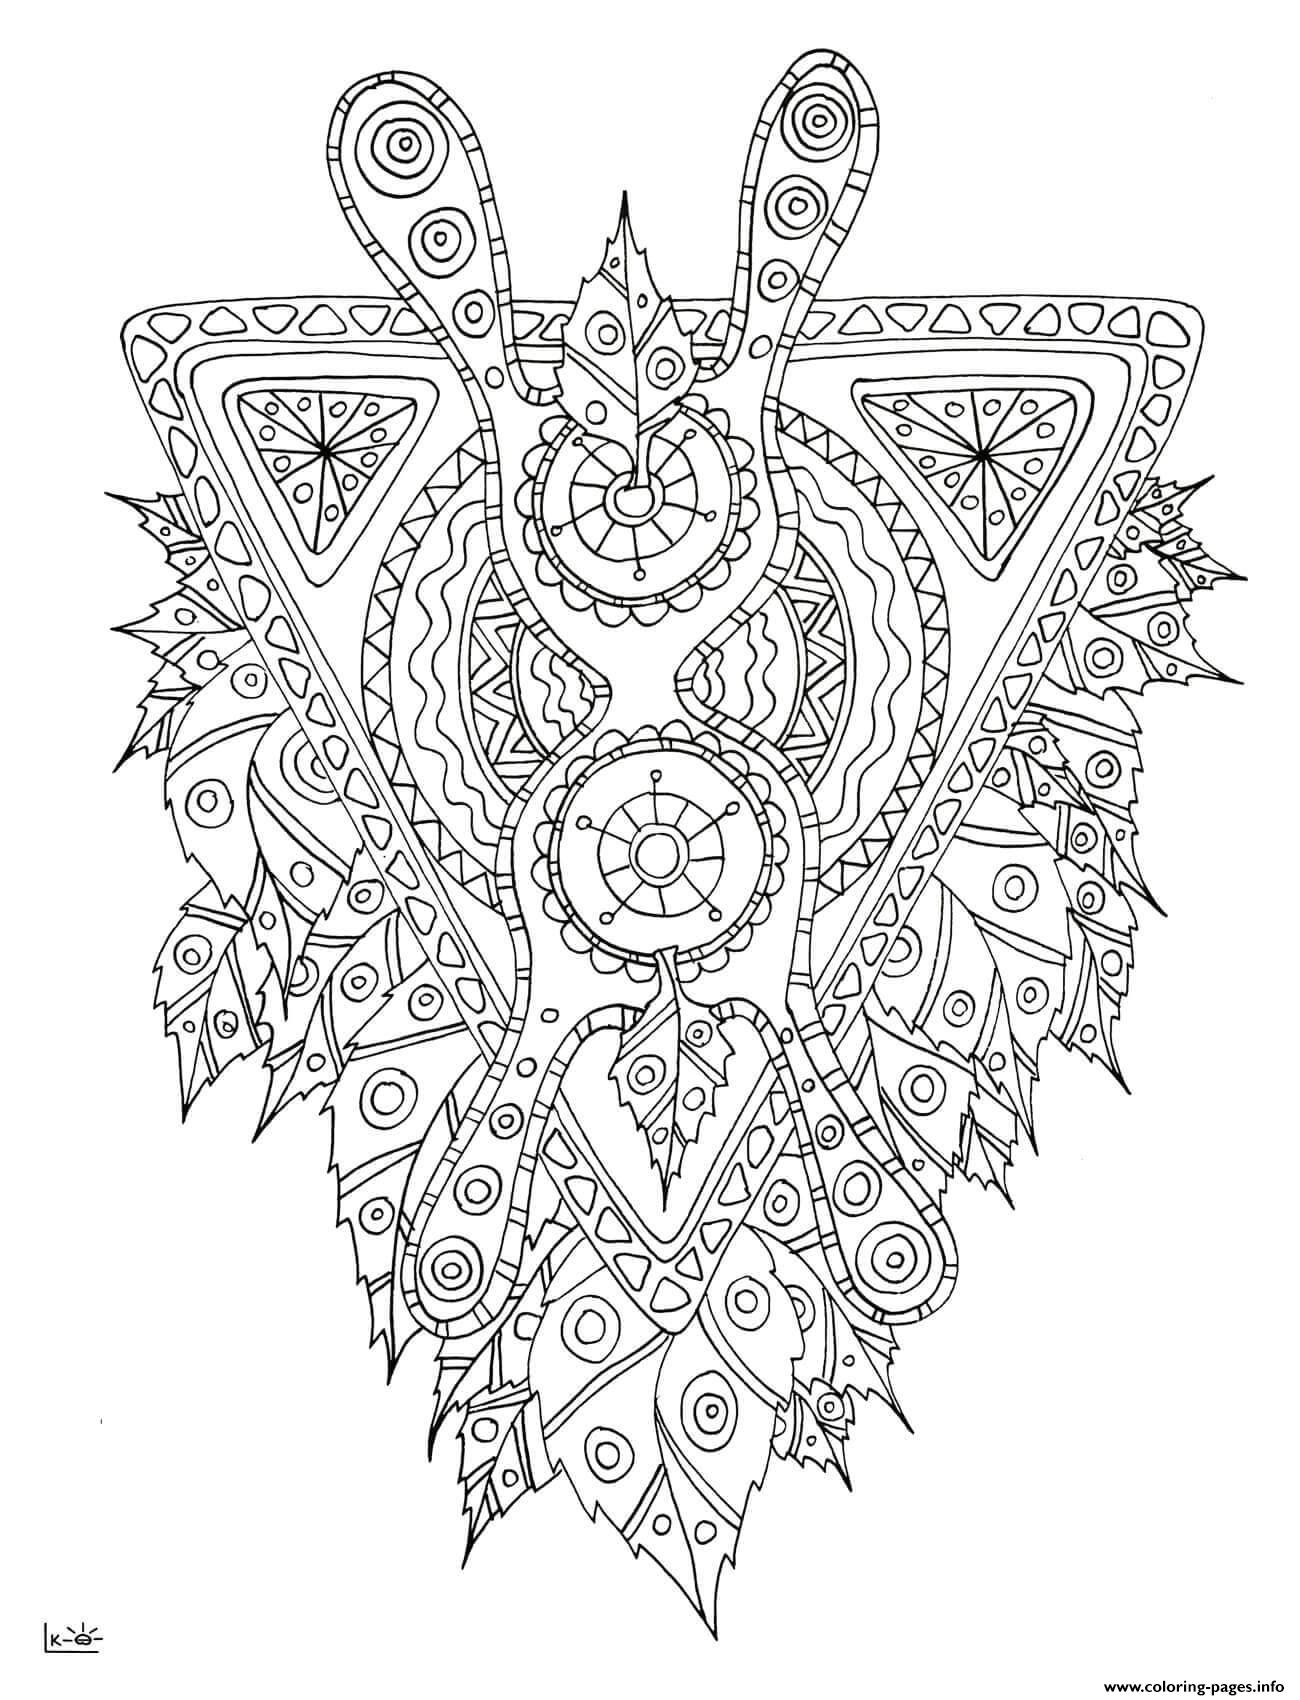 35+ inspirational pict Adult Coloring Pages Mythical : Detailed Fantasy